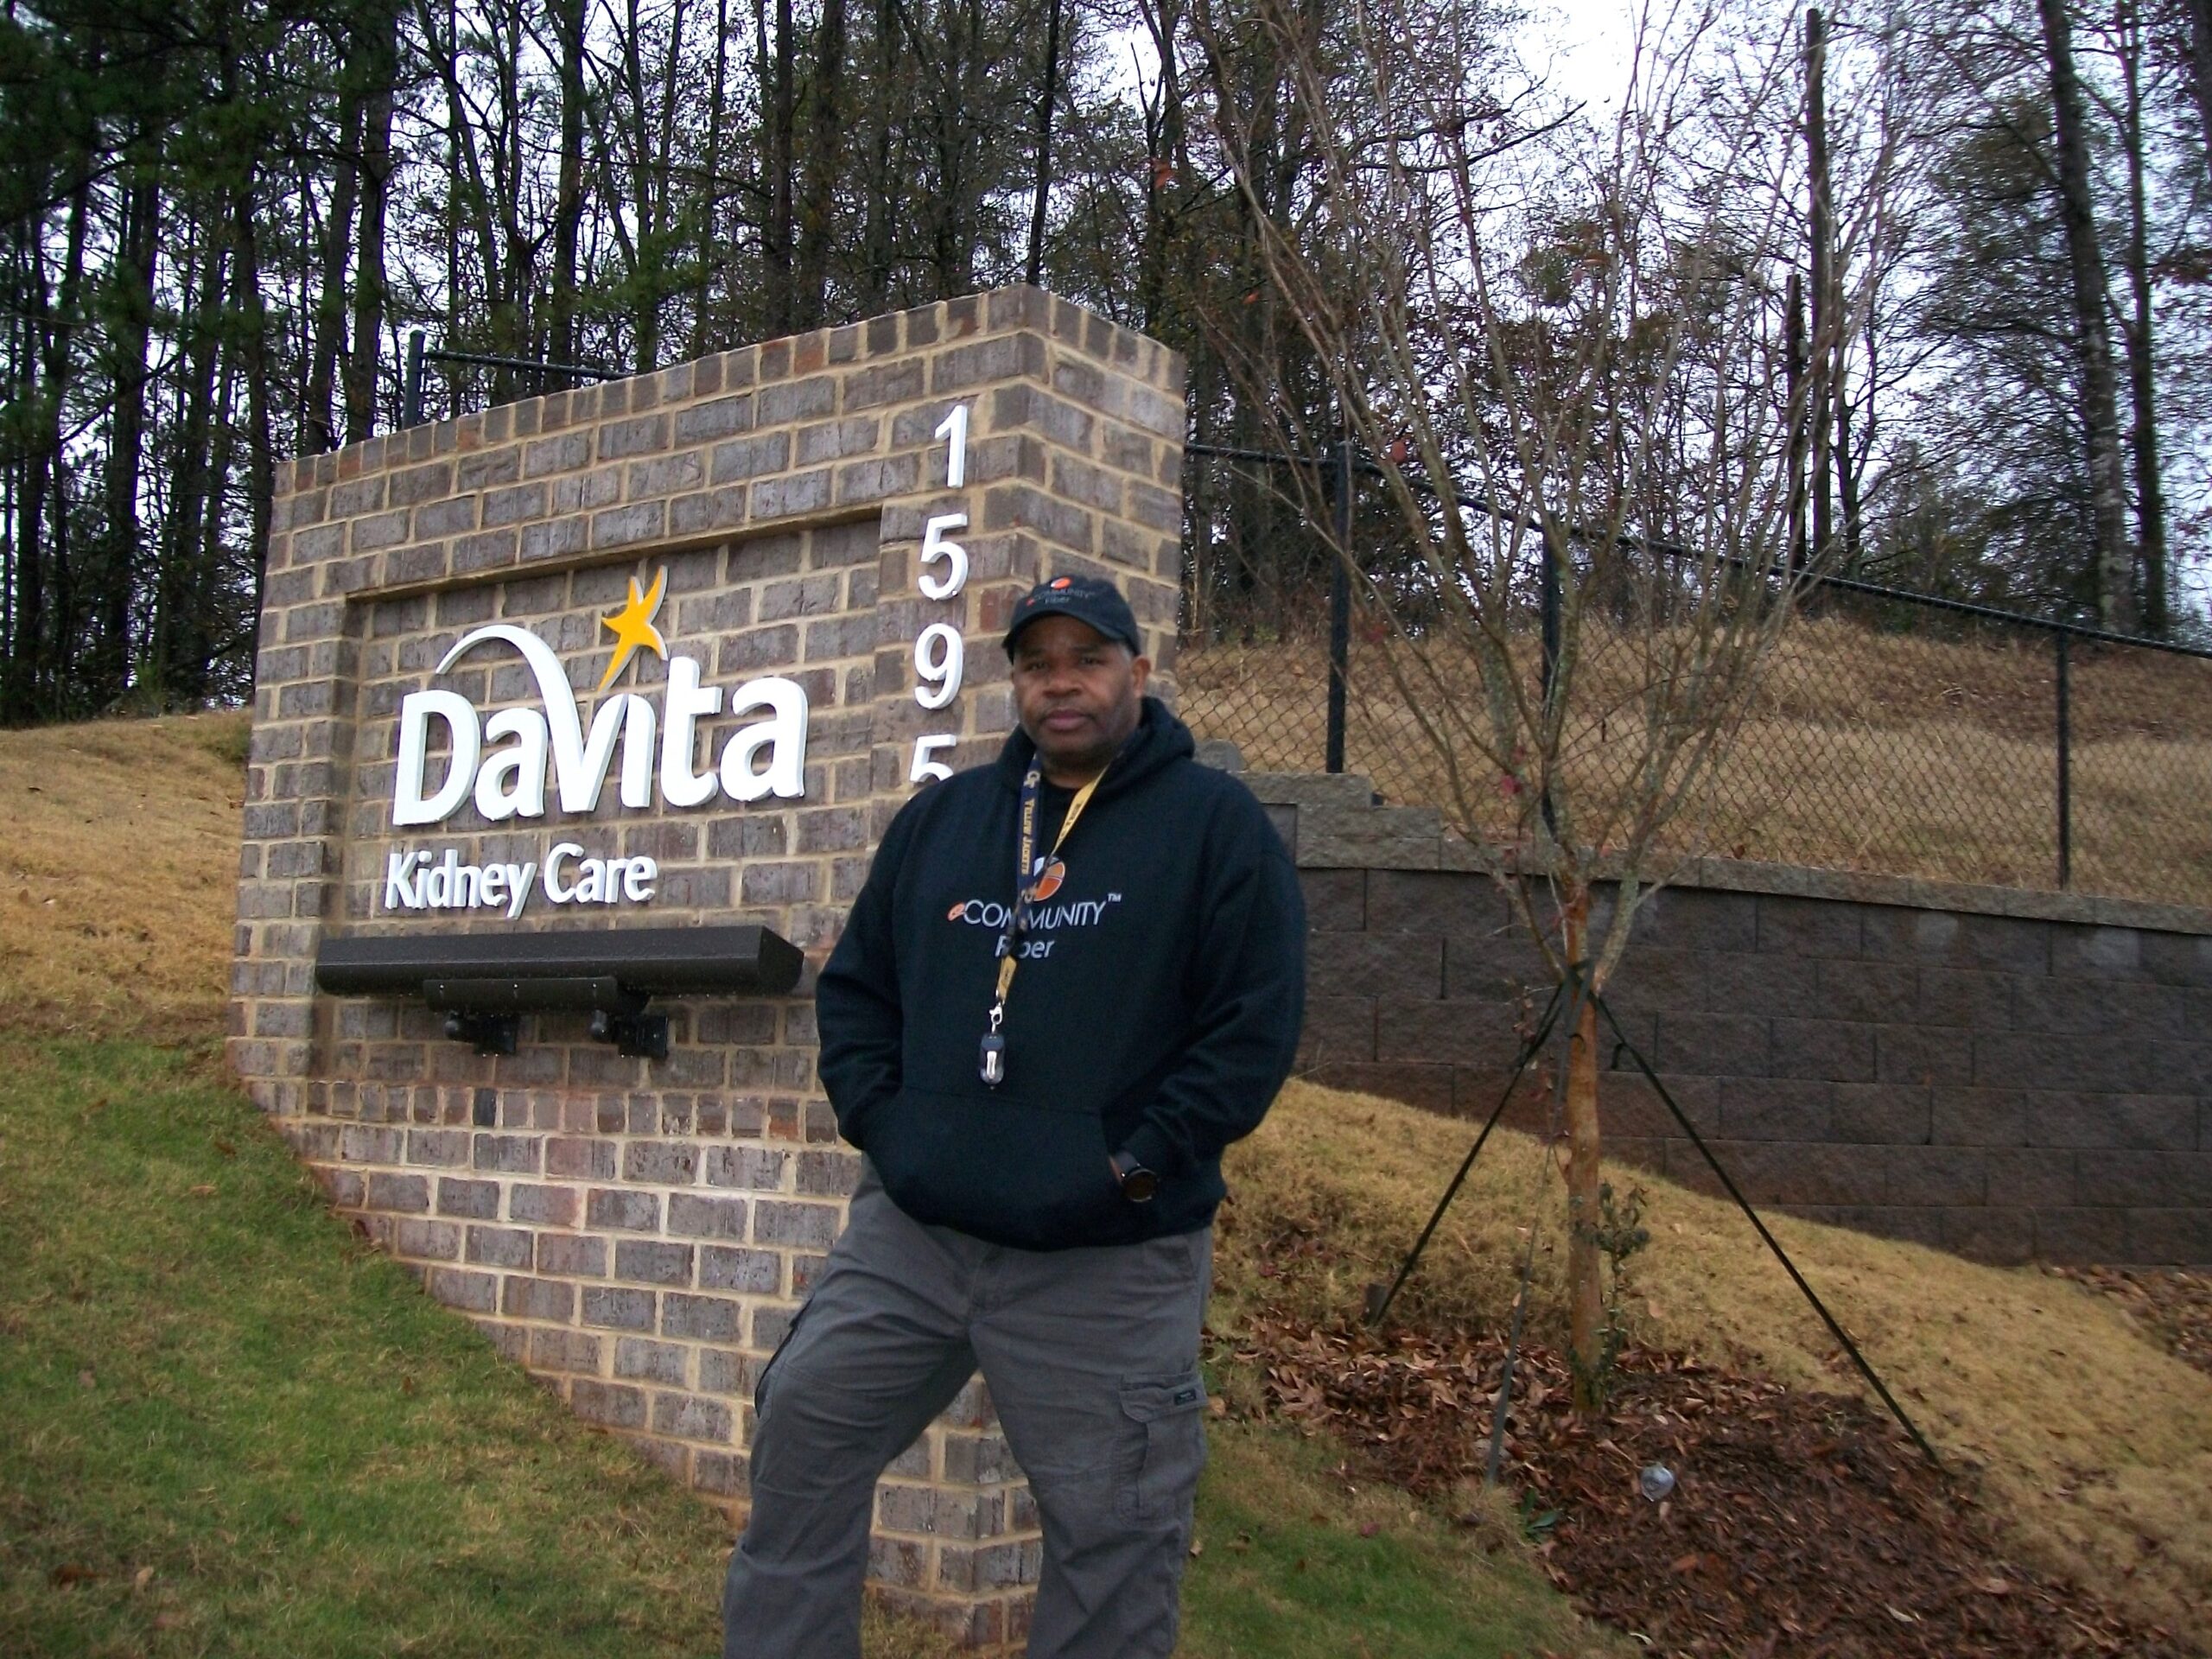 Man stands outside sign for Davita